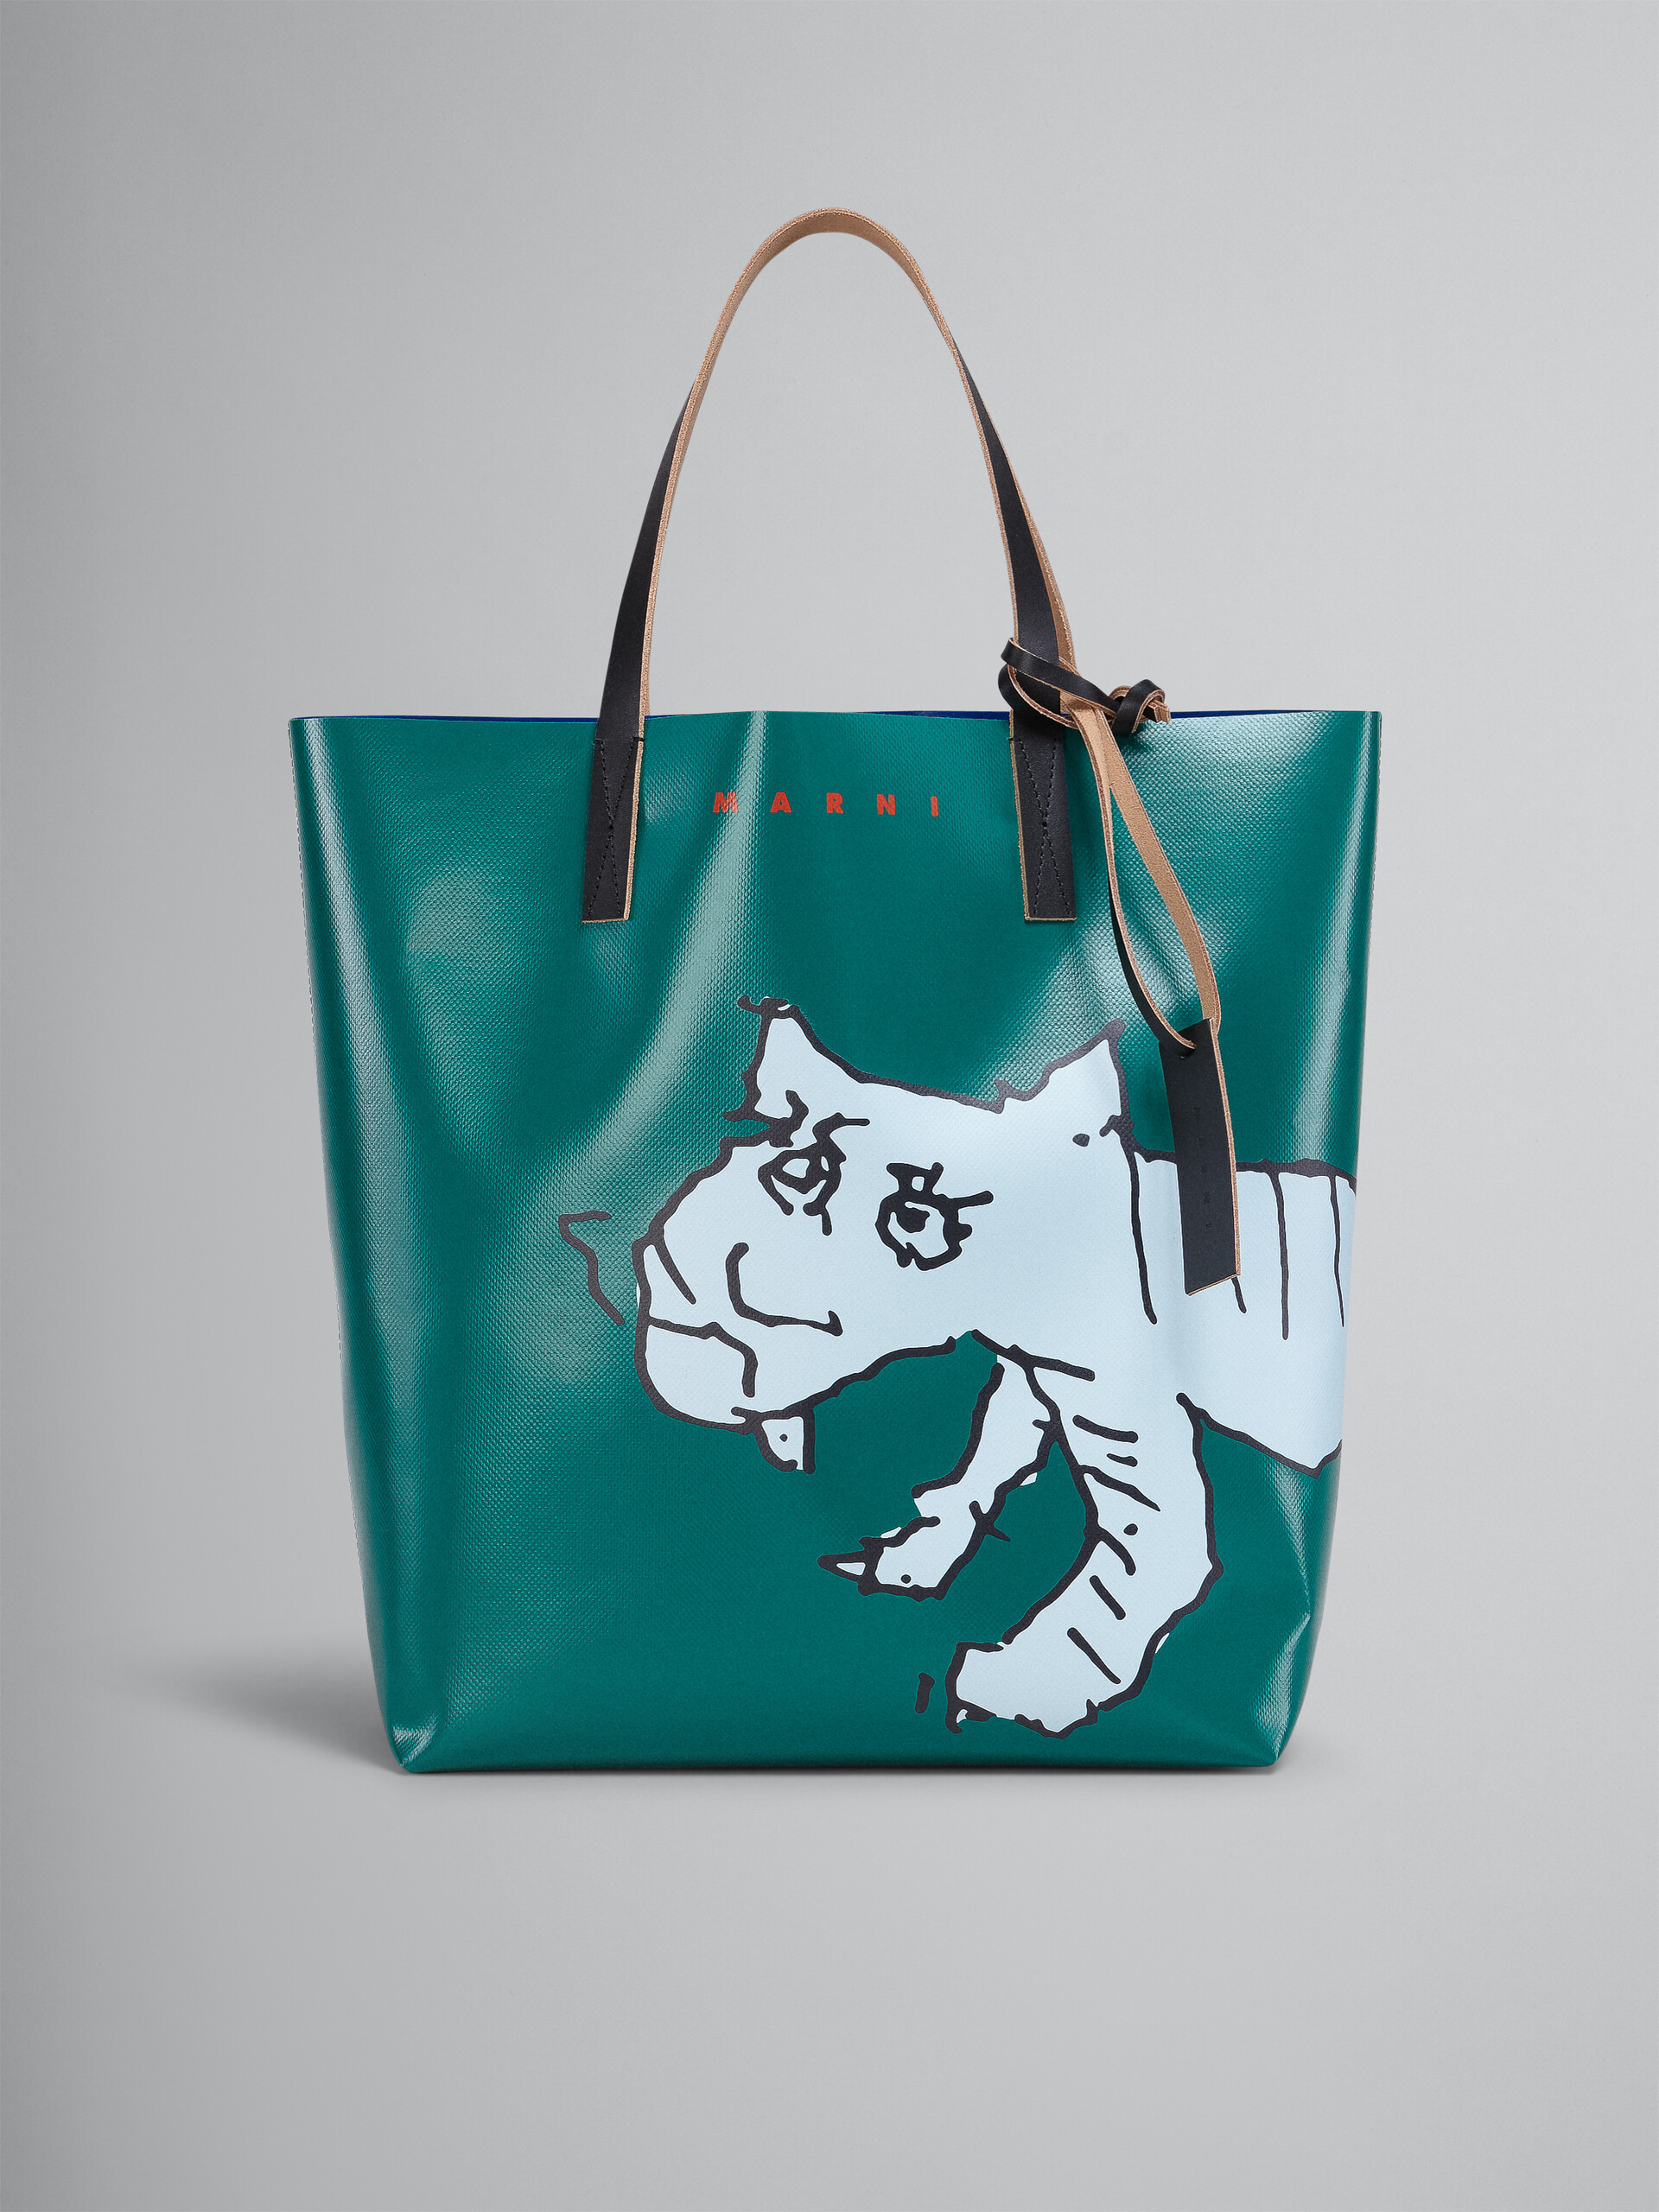 Green and blue TRIBECA bag in Tiger print - Shopping Bags - Image 1